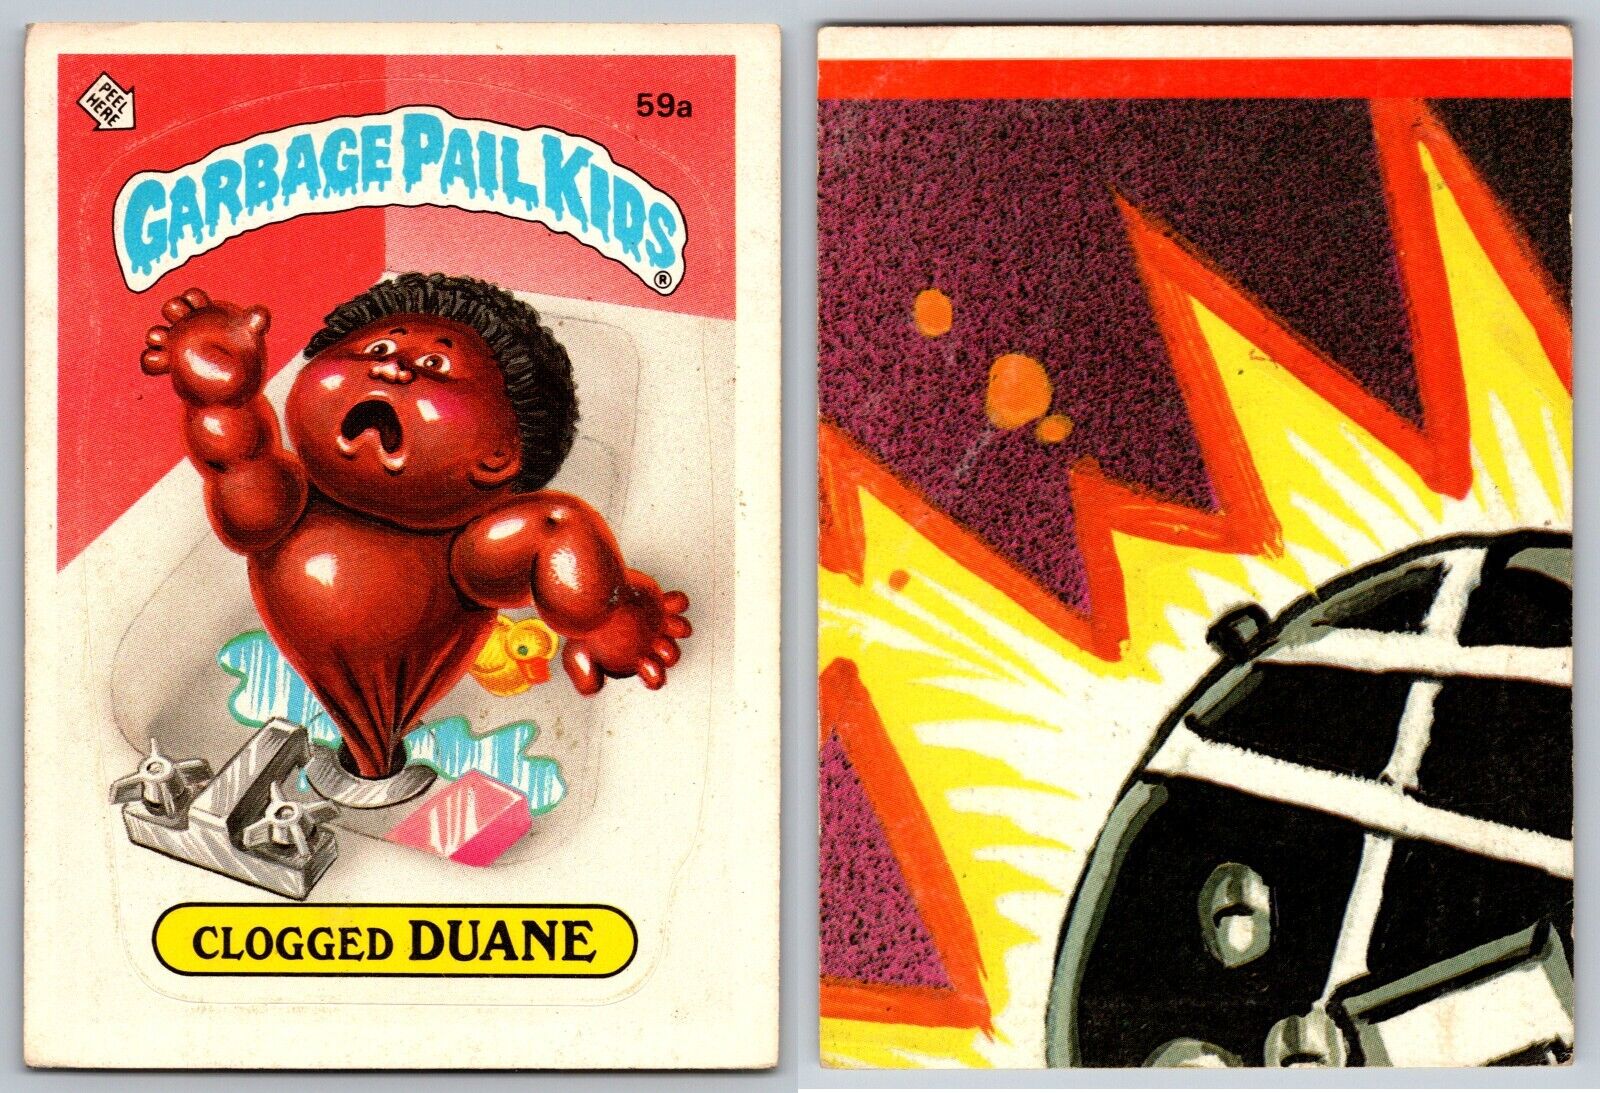 1985 Topps Garbage Pail Kids GPK Series 2 Clogged DUANE 59a LM Puzzle Glossy